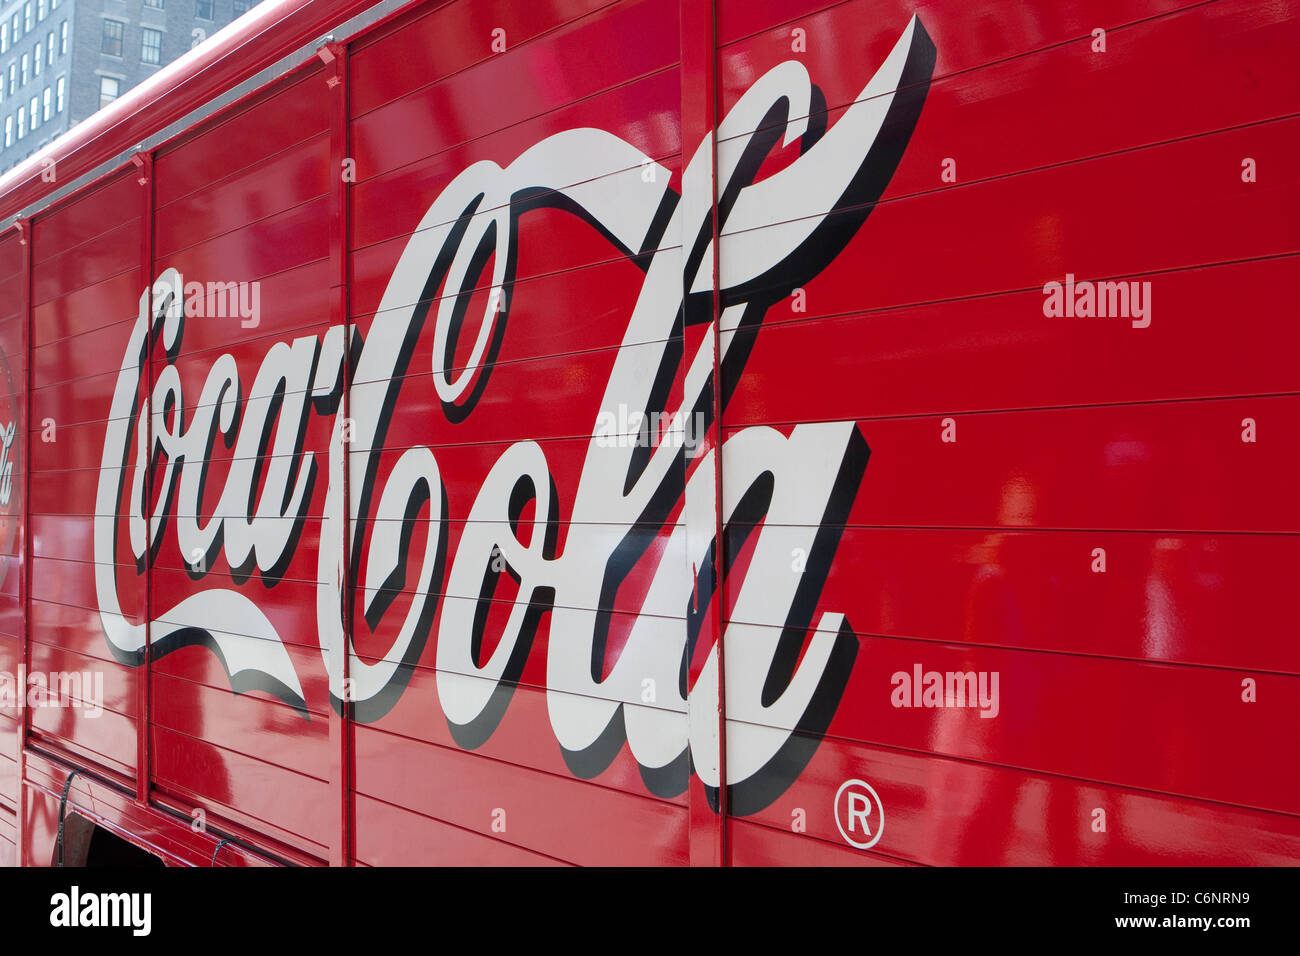 A Coca-Cola delivery truck is pictured in the New York City borough of Manhattan, NY, Tuesday August 2, 2011. Stock Photo